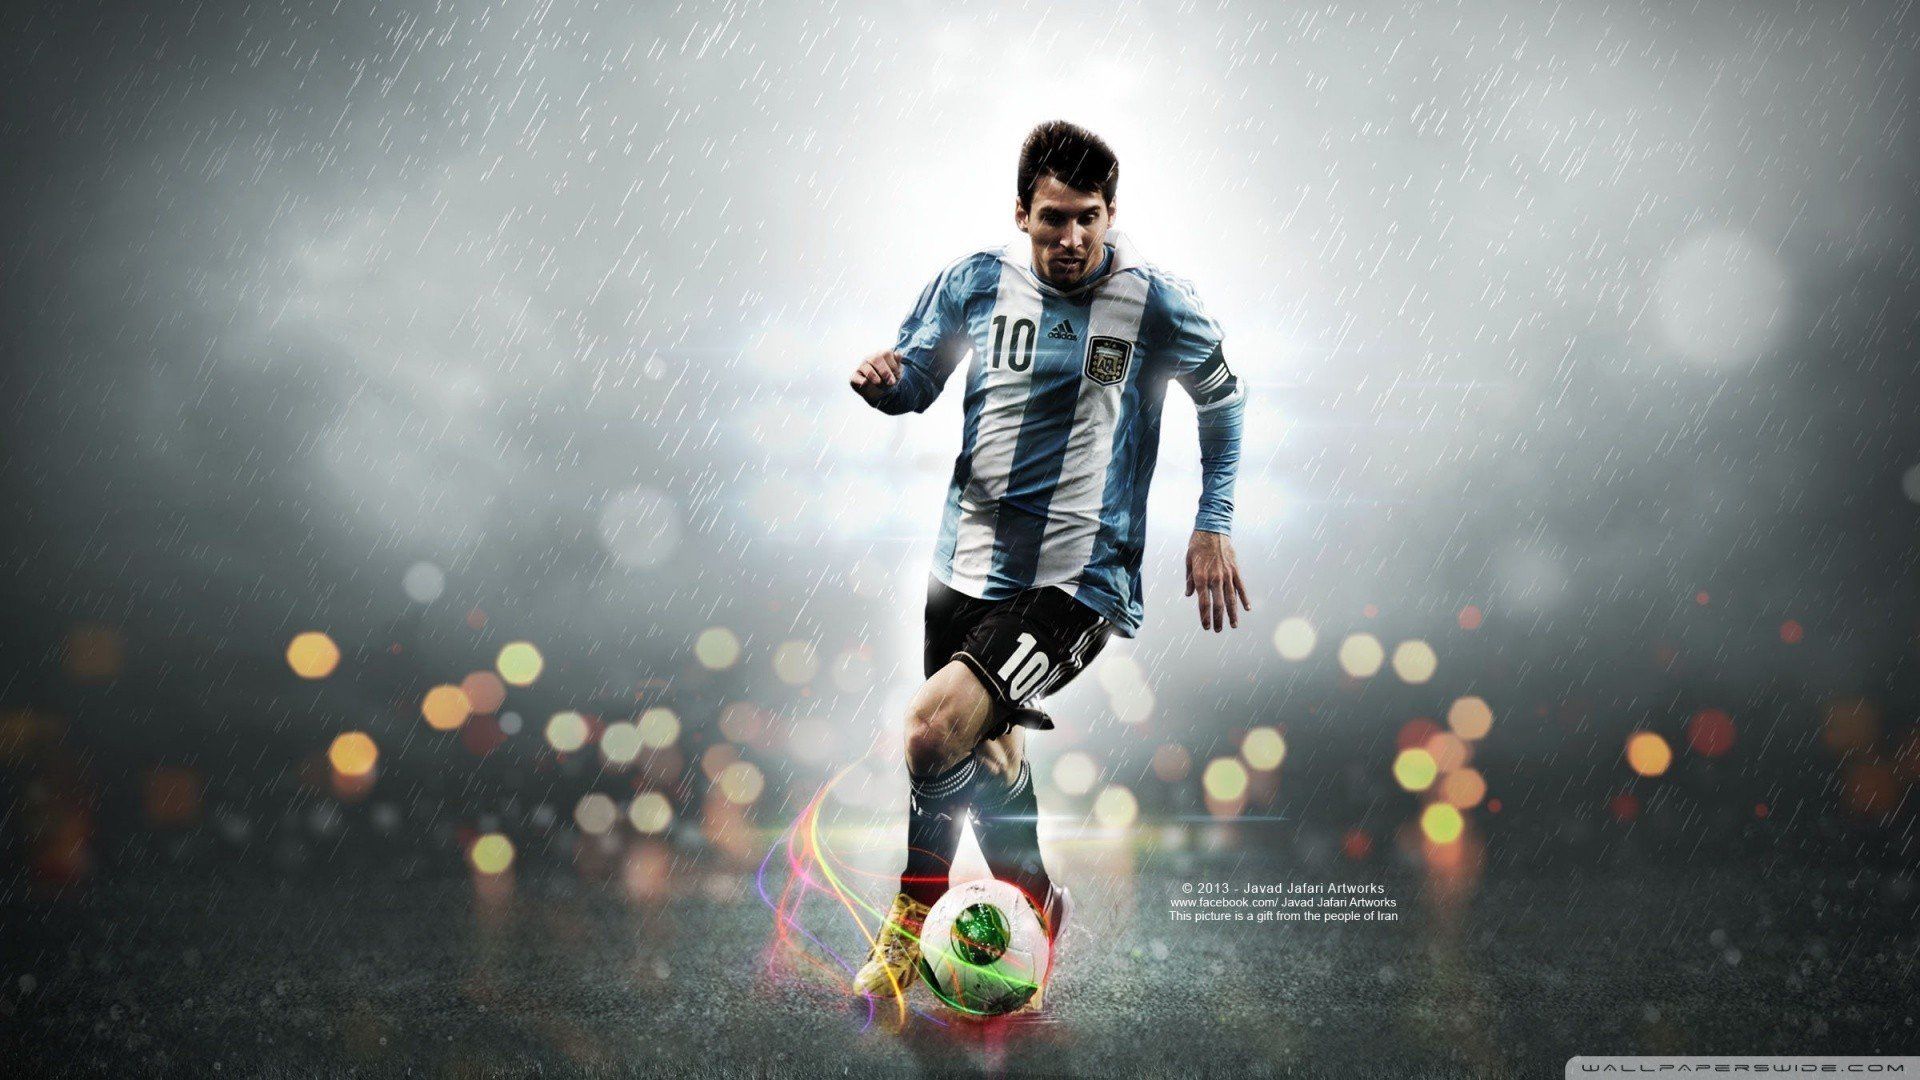 px Lionel Messi High Quality Wallpaper, High Definition Wallpaper